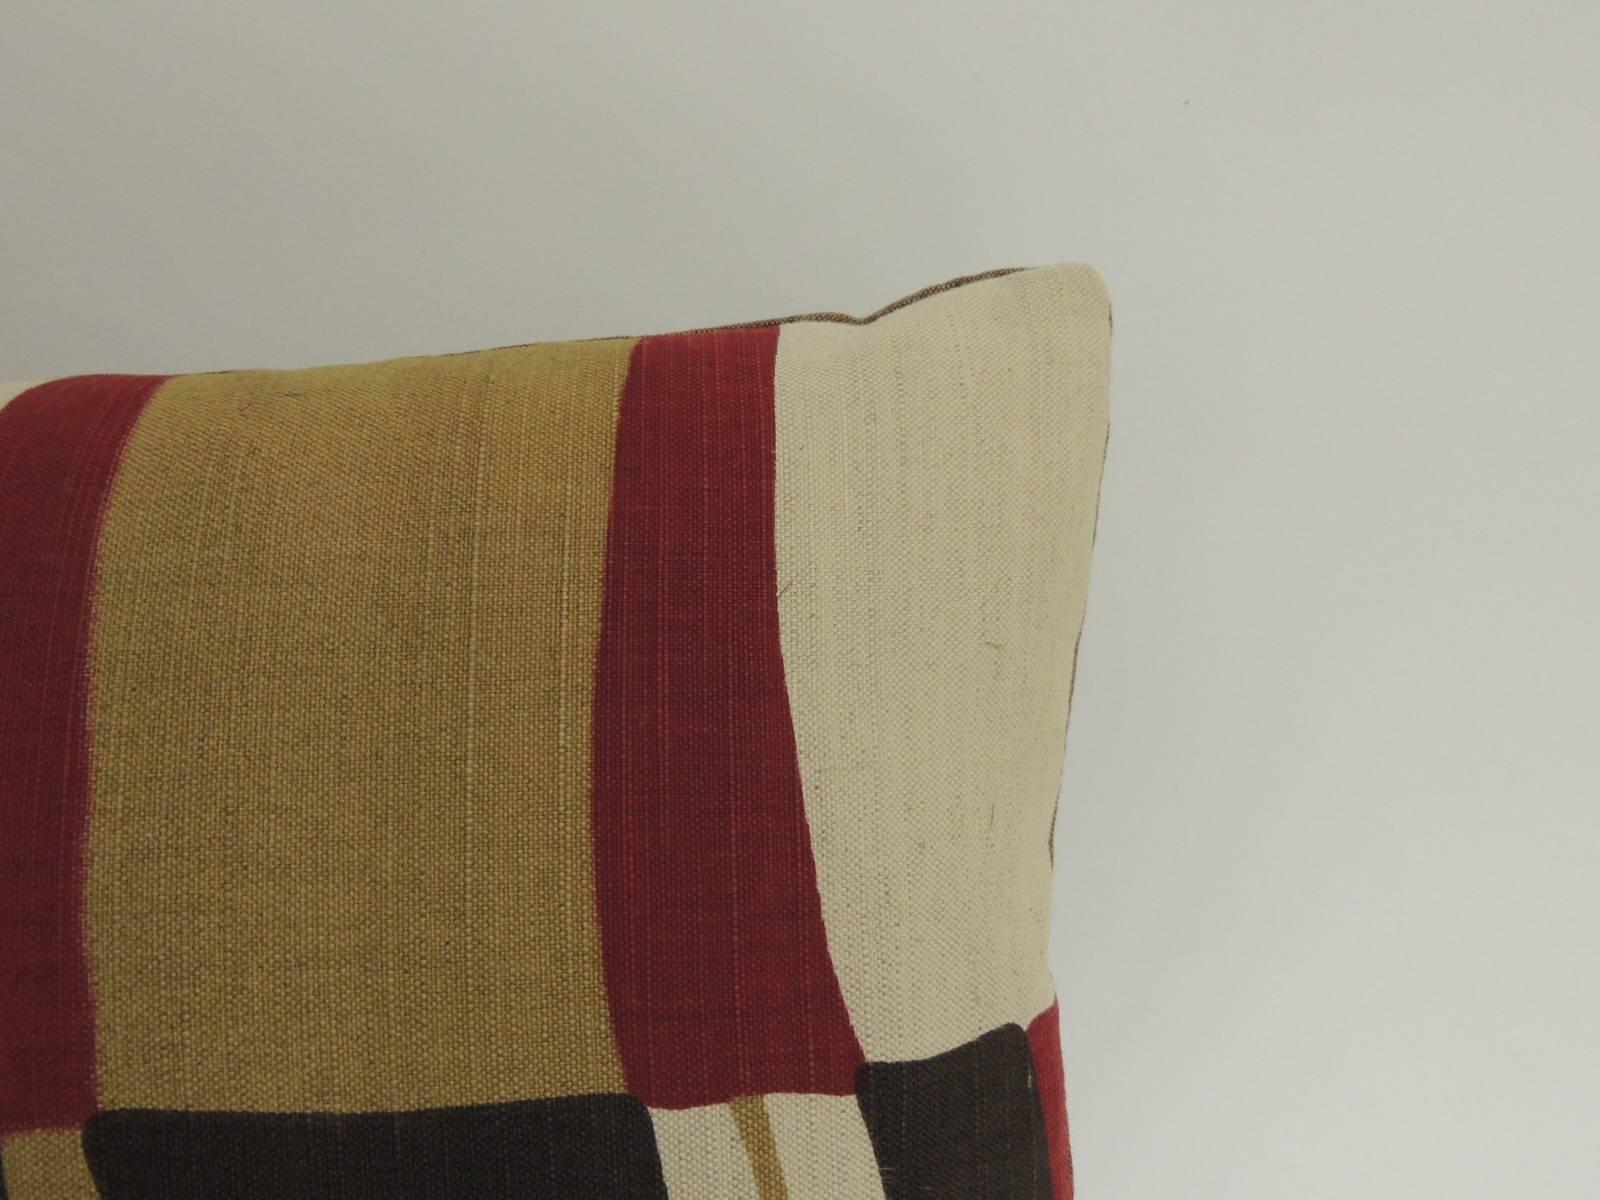 Mid-century Modern colorful bolster pillow in printed linen in shades of burgundy, mustard, black and natural with a textured brown linen backing. Made with a textile fragment from the USA 1980s. Closure: hand-stitched (no zipper) with custom made